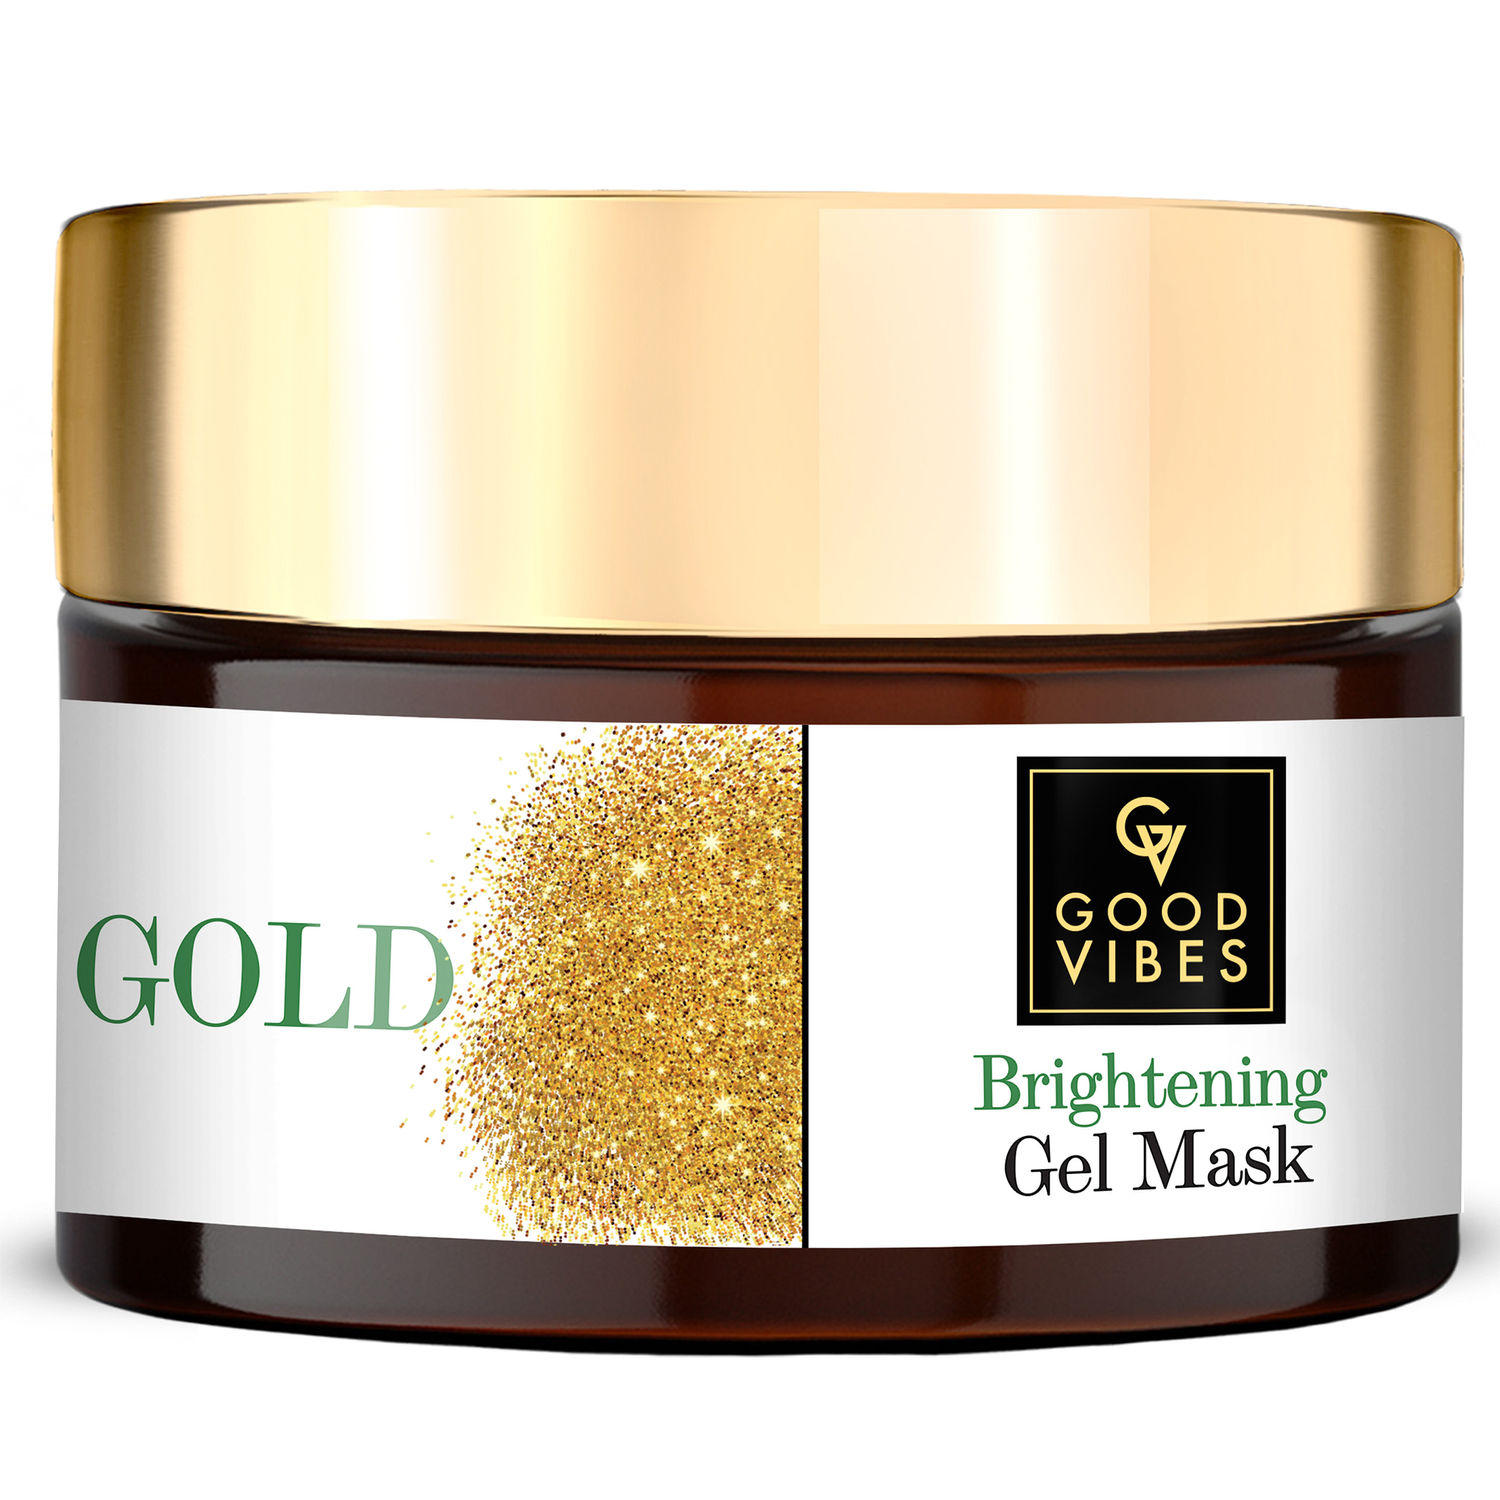 Good Vibes Gold Brightening Gel Mask | Anti-Ageing, Nourishing | No Parabens, No Sulphates, No Mineral Oil, No Animal Testing (50g)